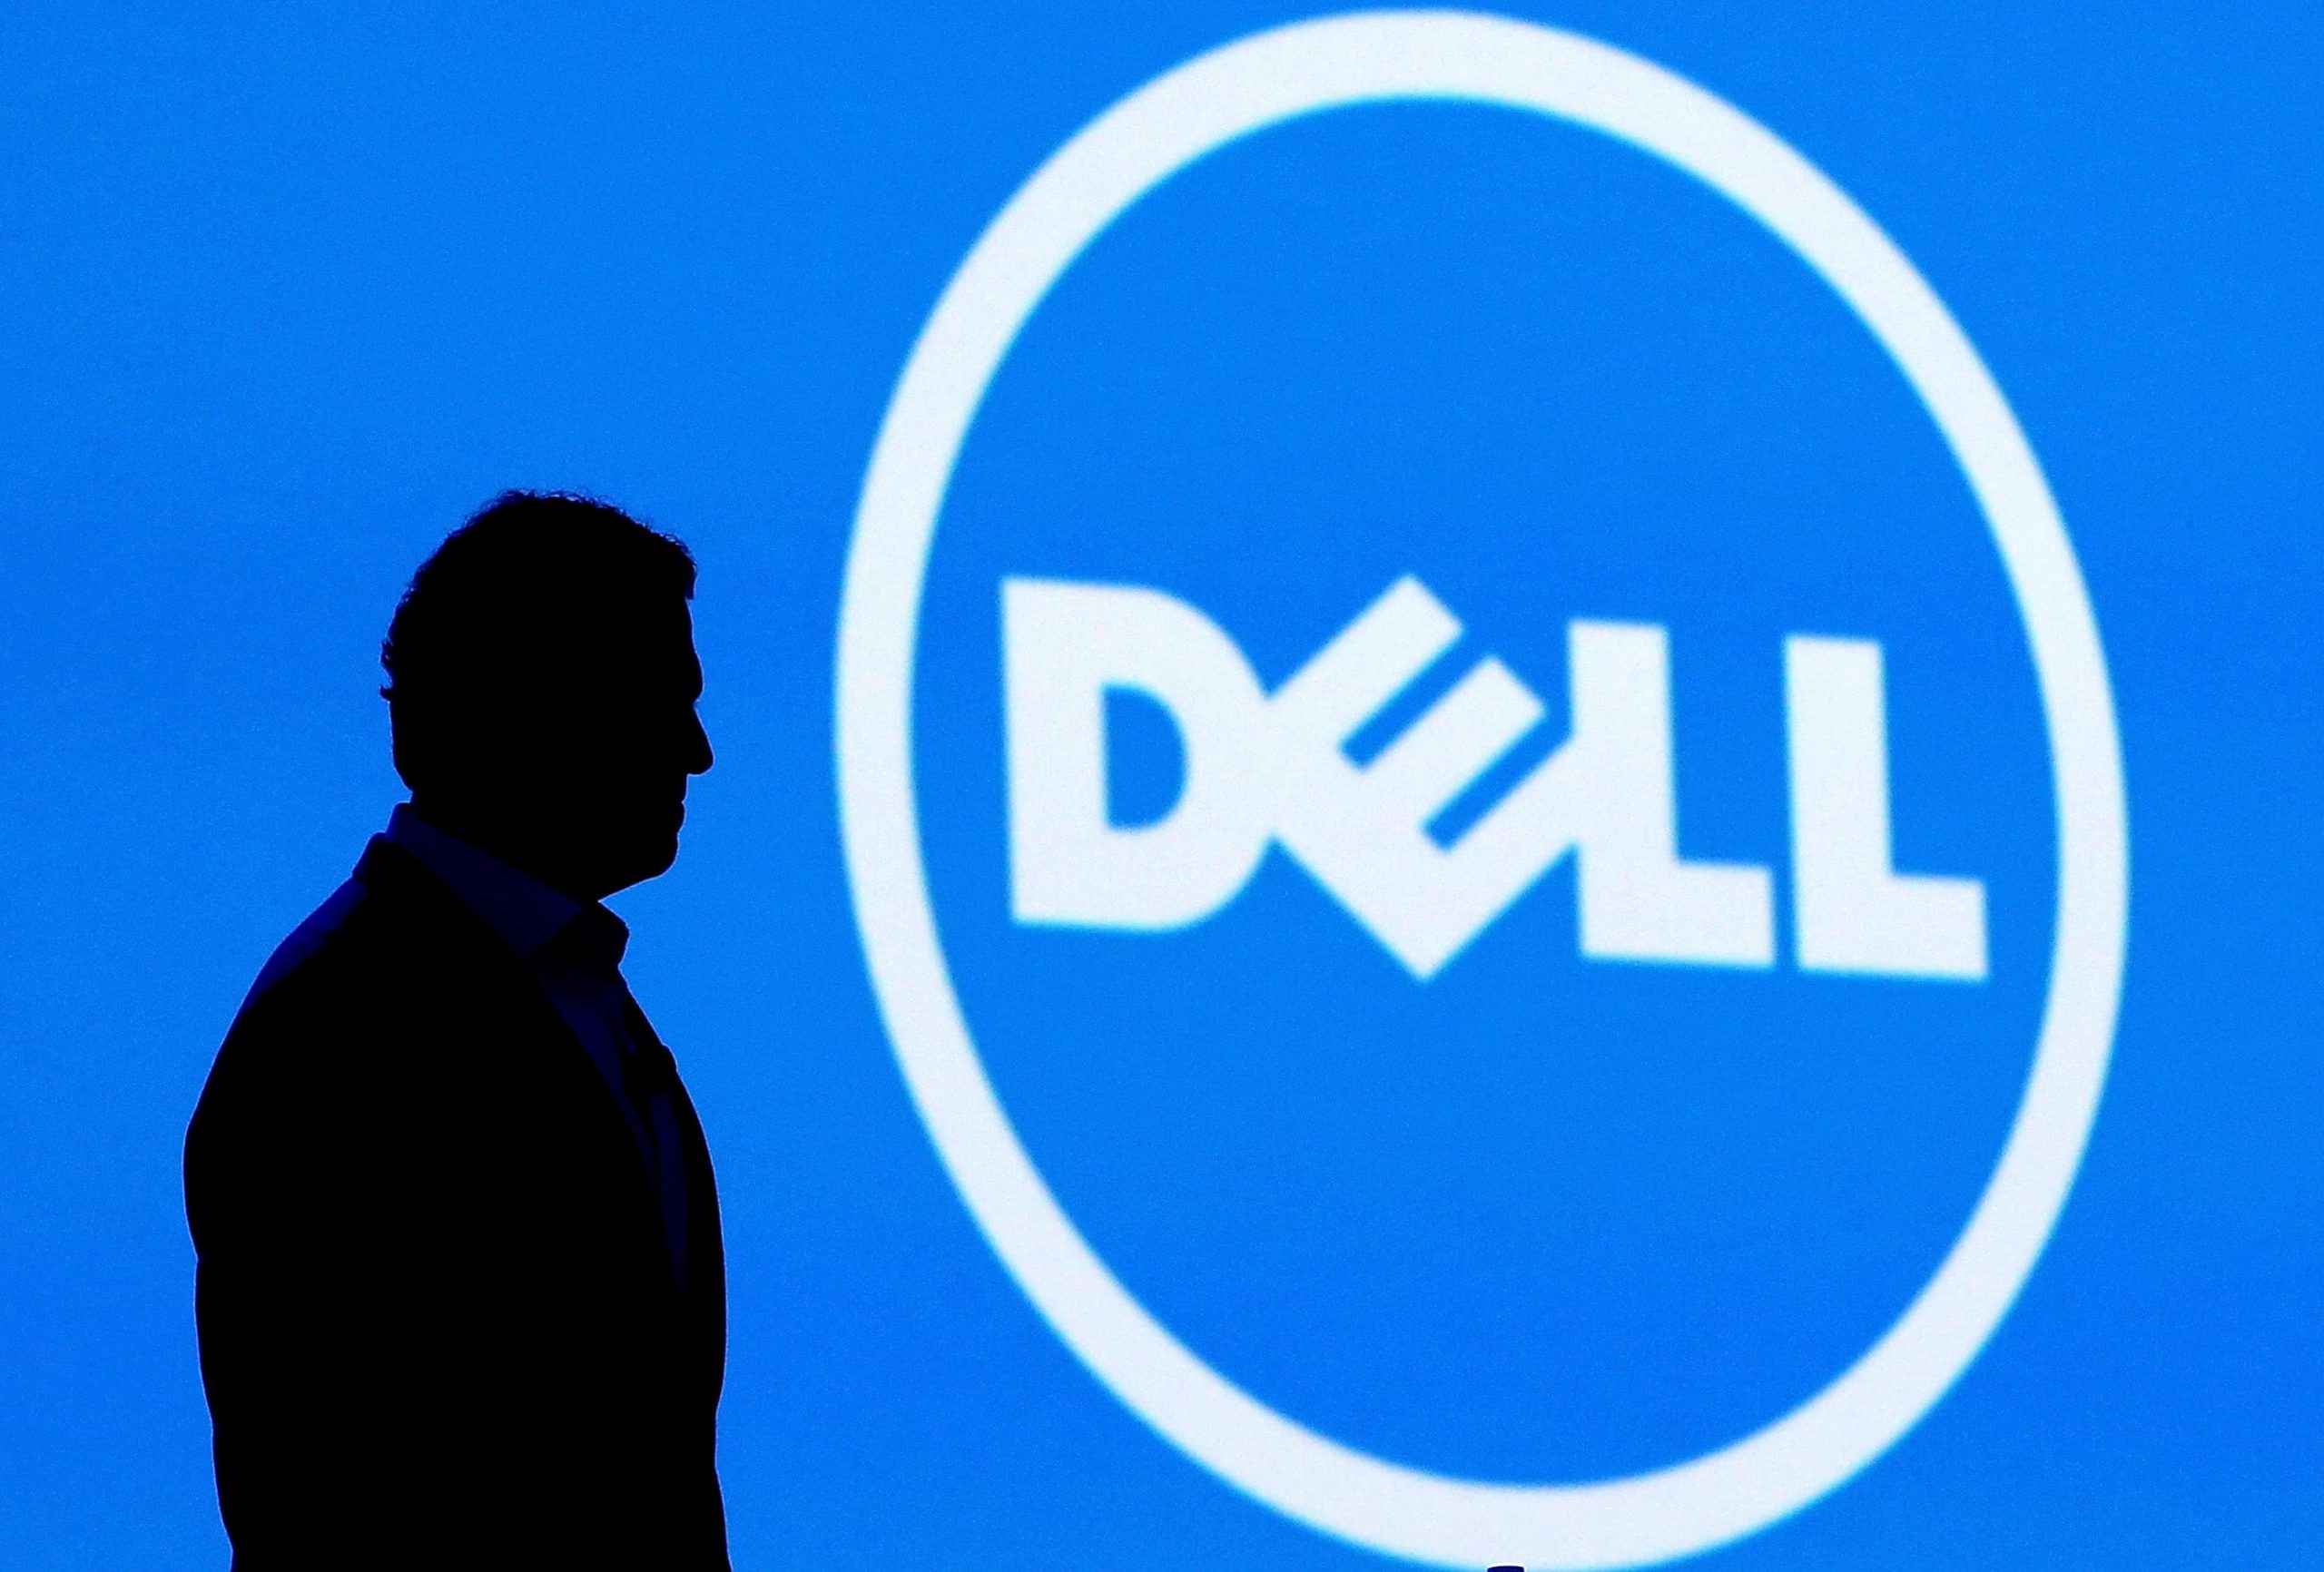 Stocks making the biggest moves midday: Dell, Peloton, Workday and more